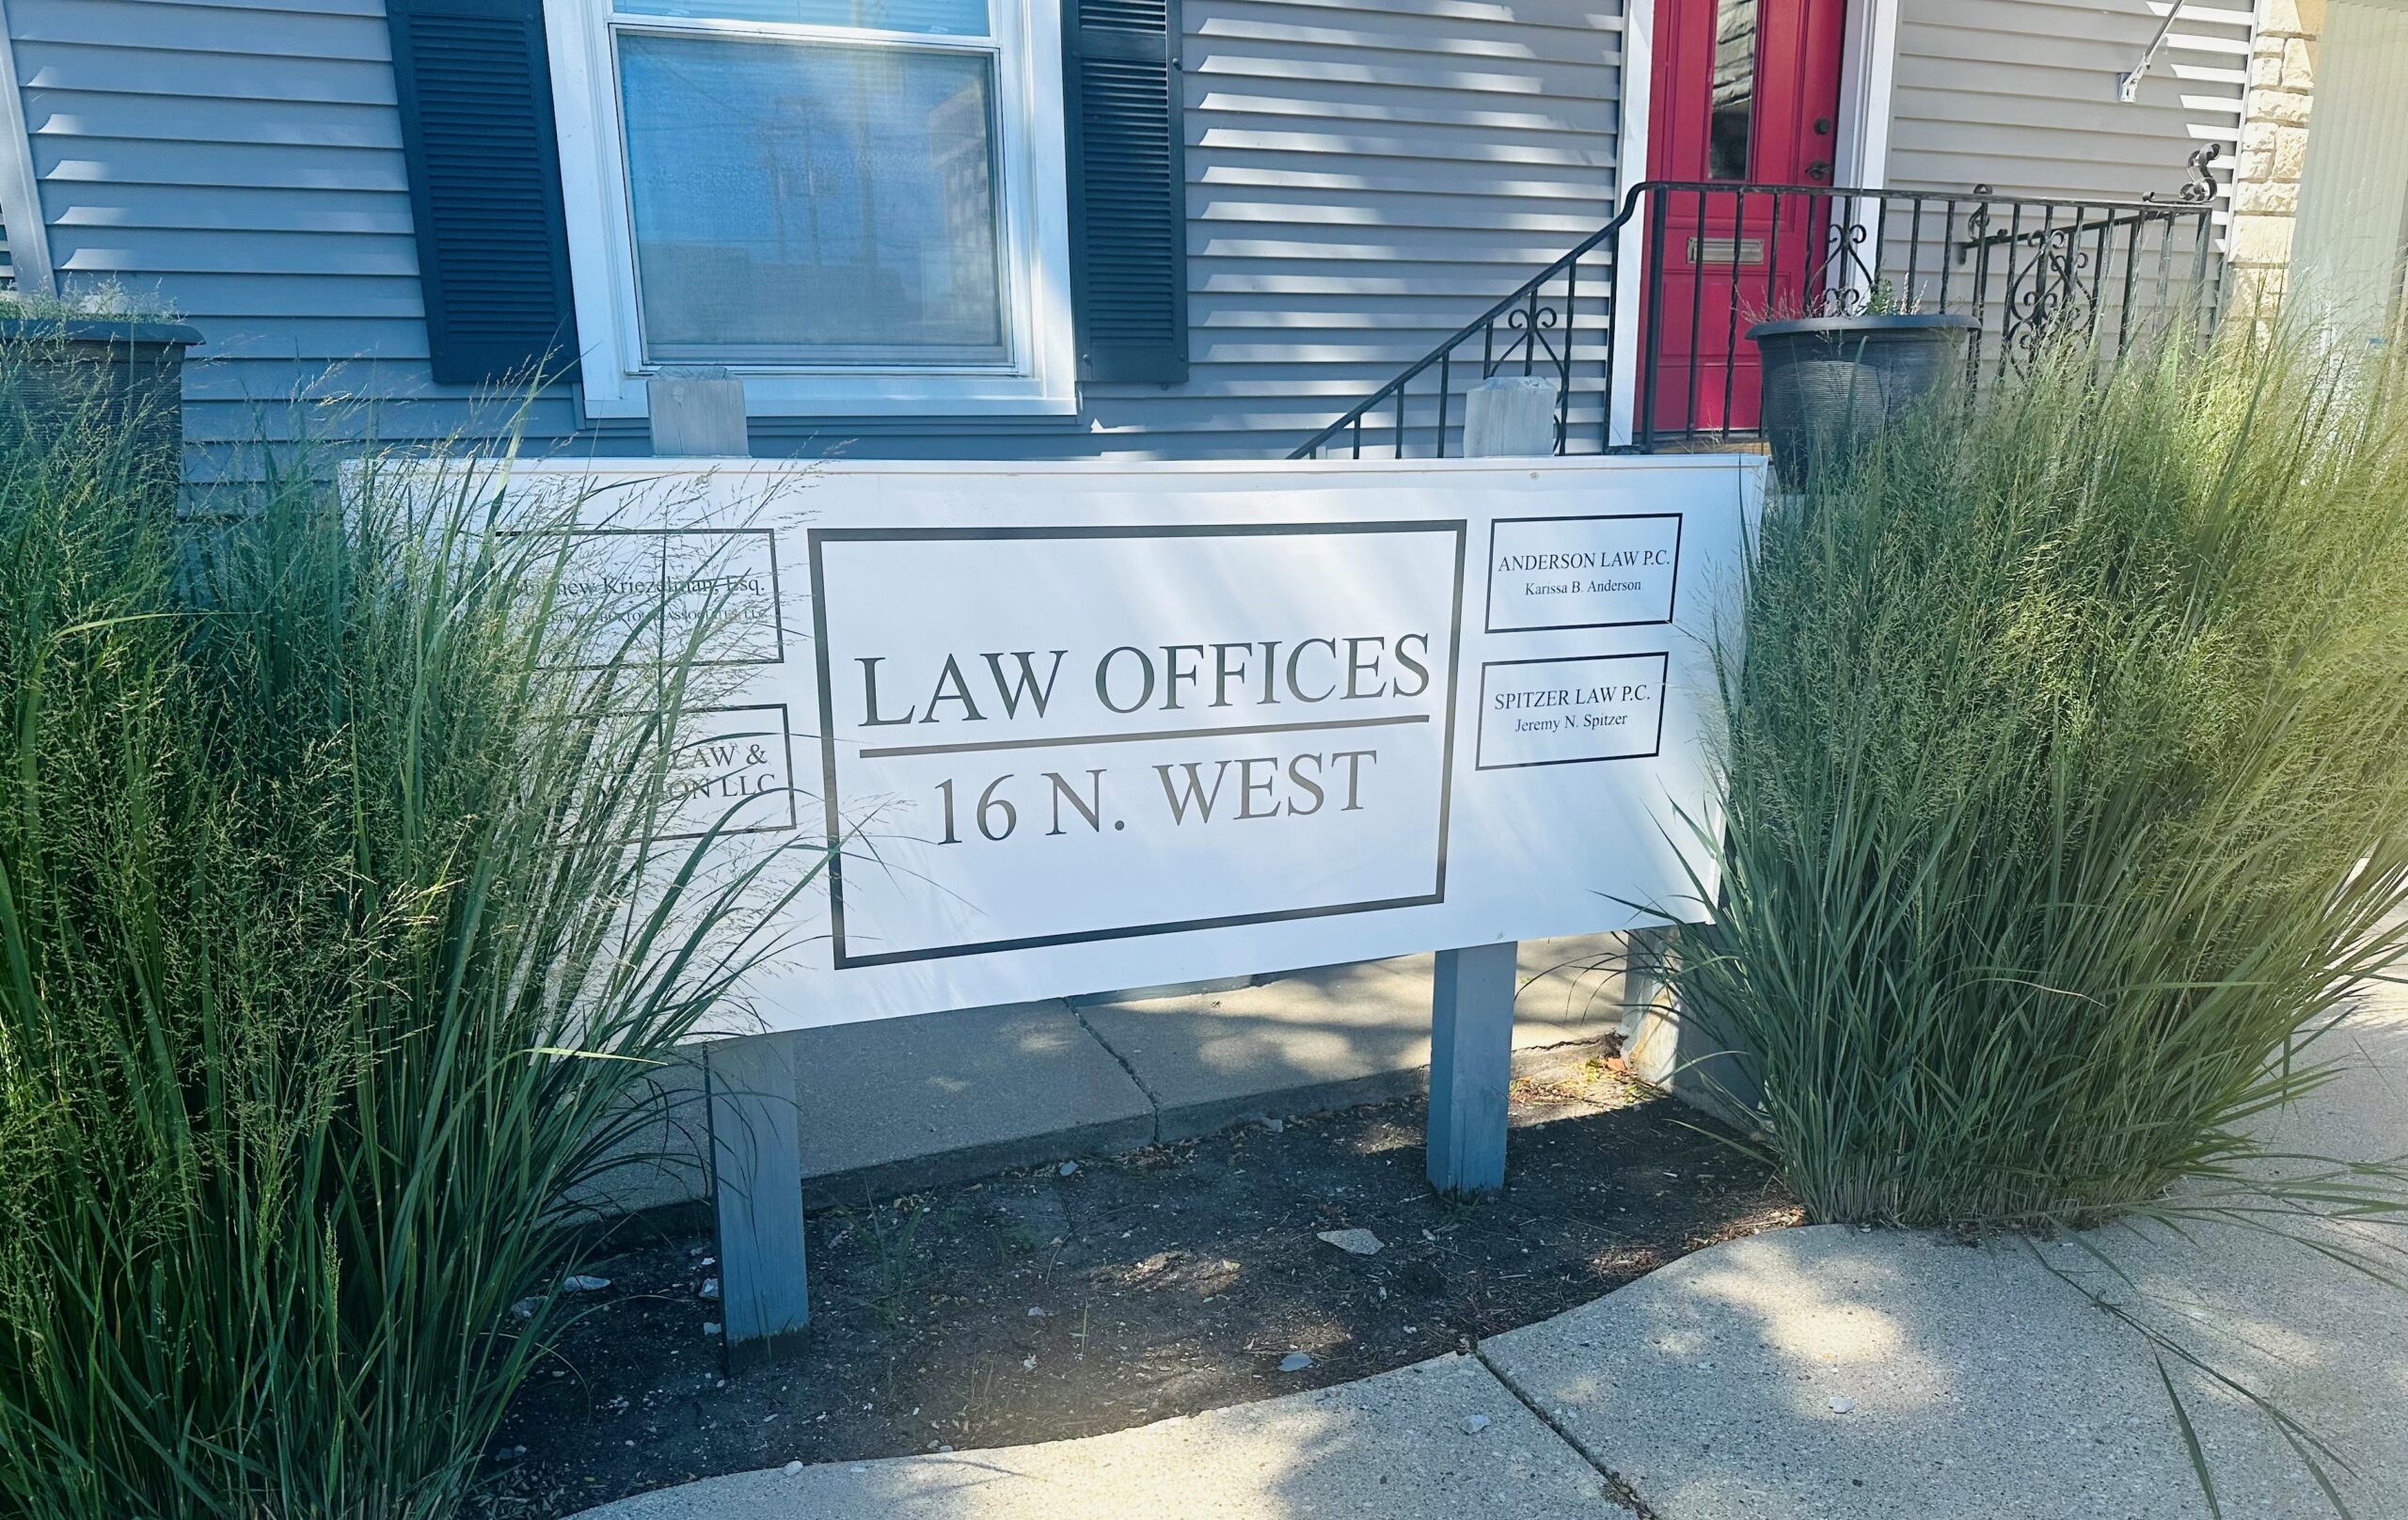 Anderson Law, P.C. signage